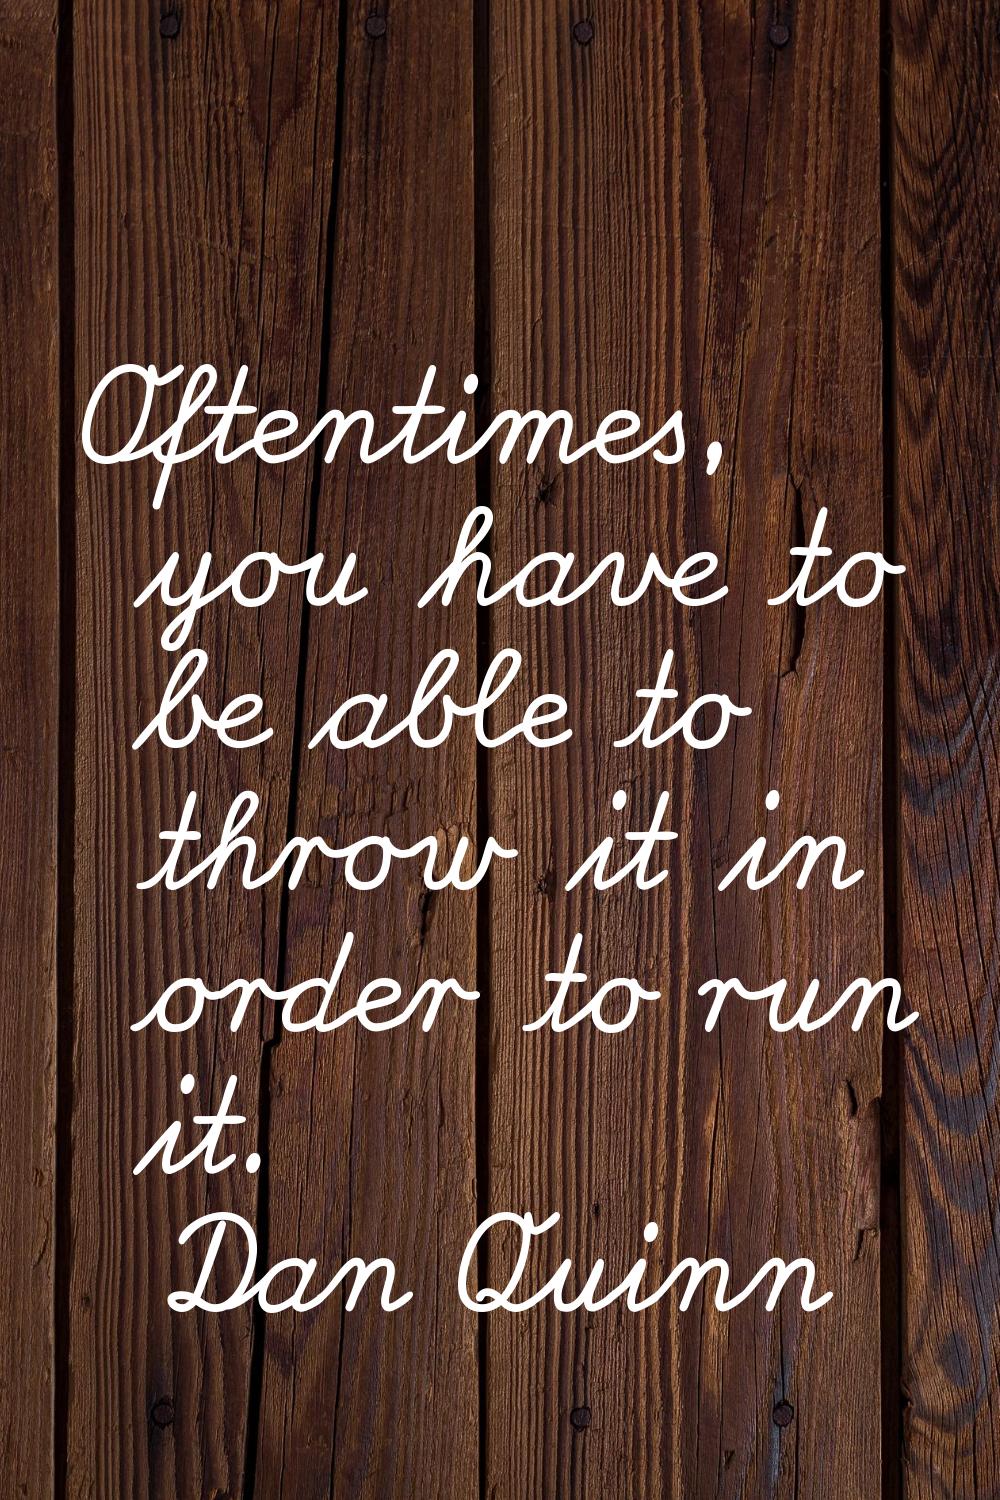 Oftentimes, you have to be able to throw it in order to run it.